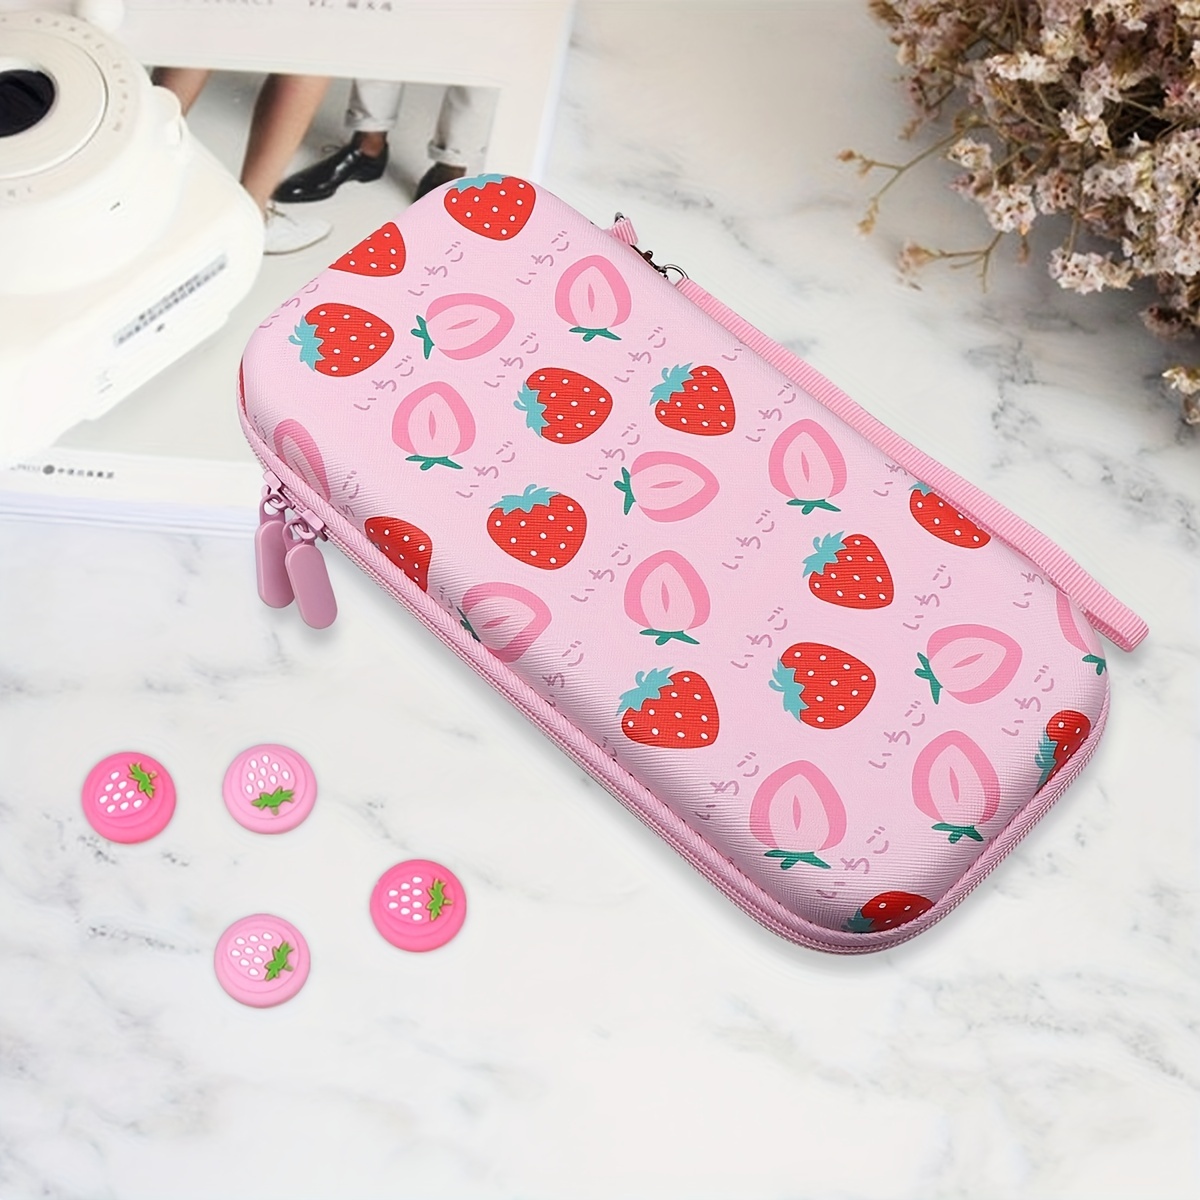 cute carrying case for switch switch oled hard portable travel game case switch accessories storage bag details 7